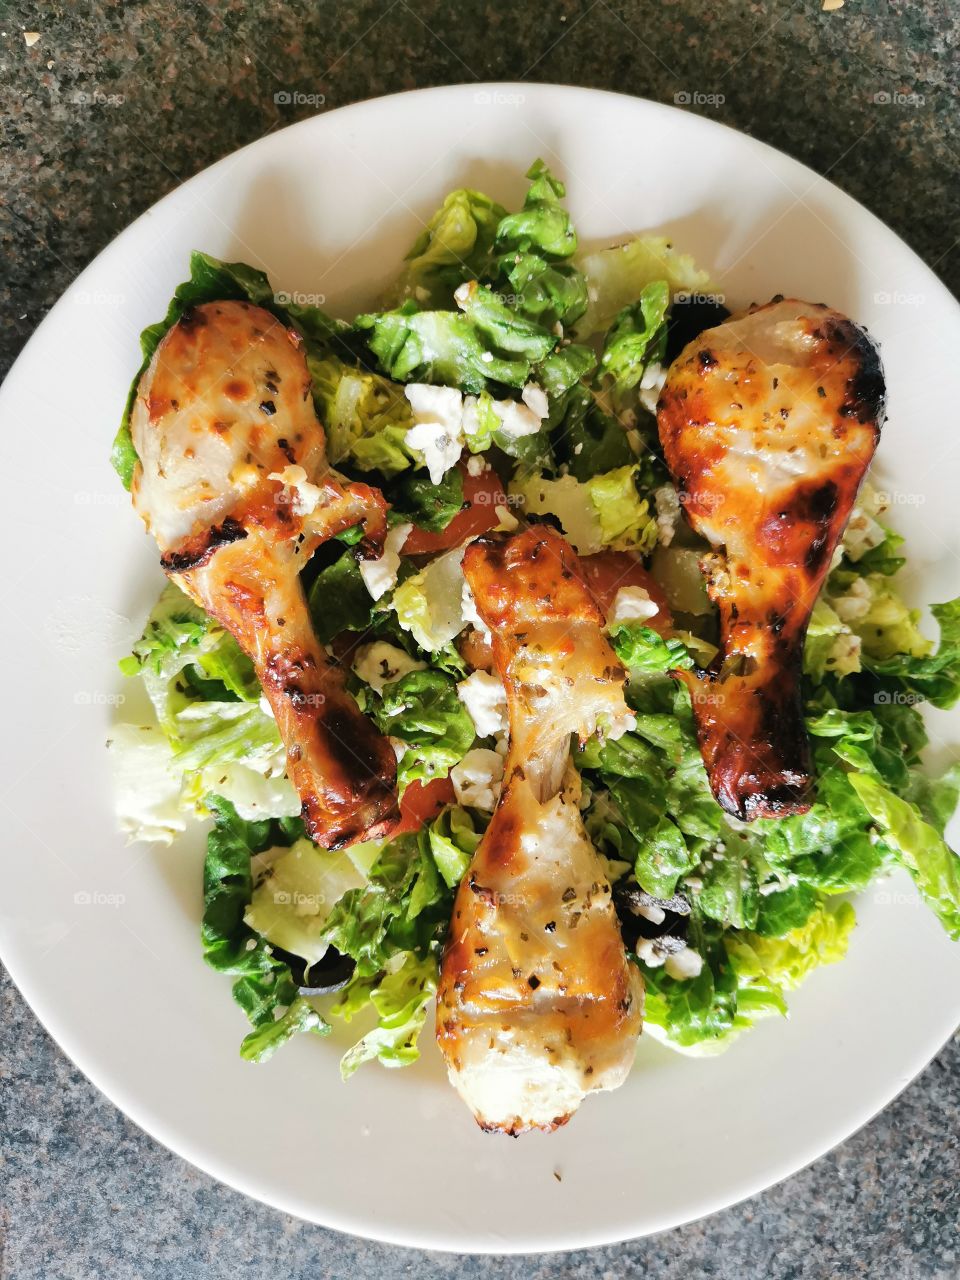 Delicious Greek Style Chicken and Salad